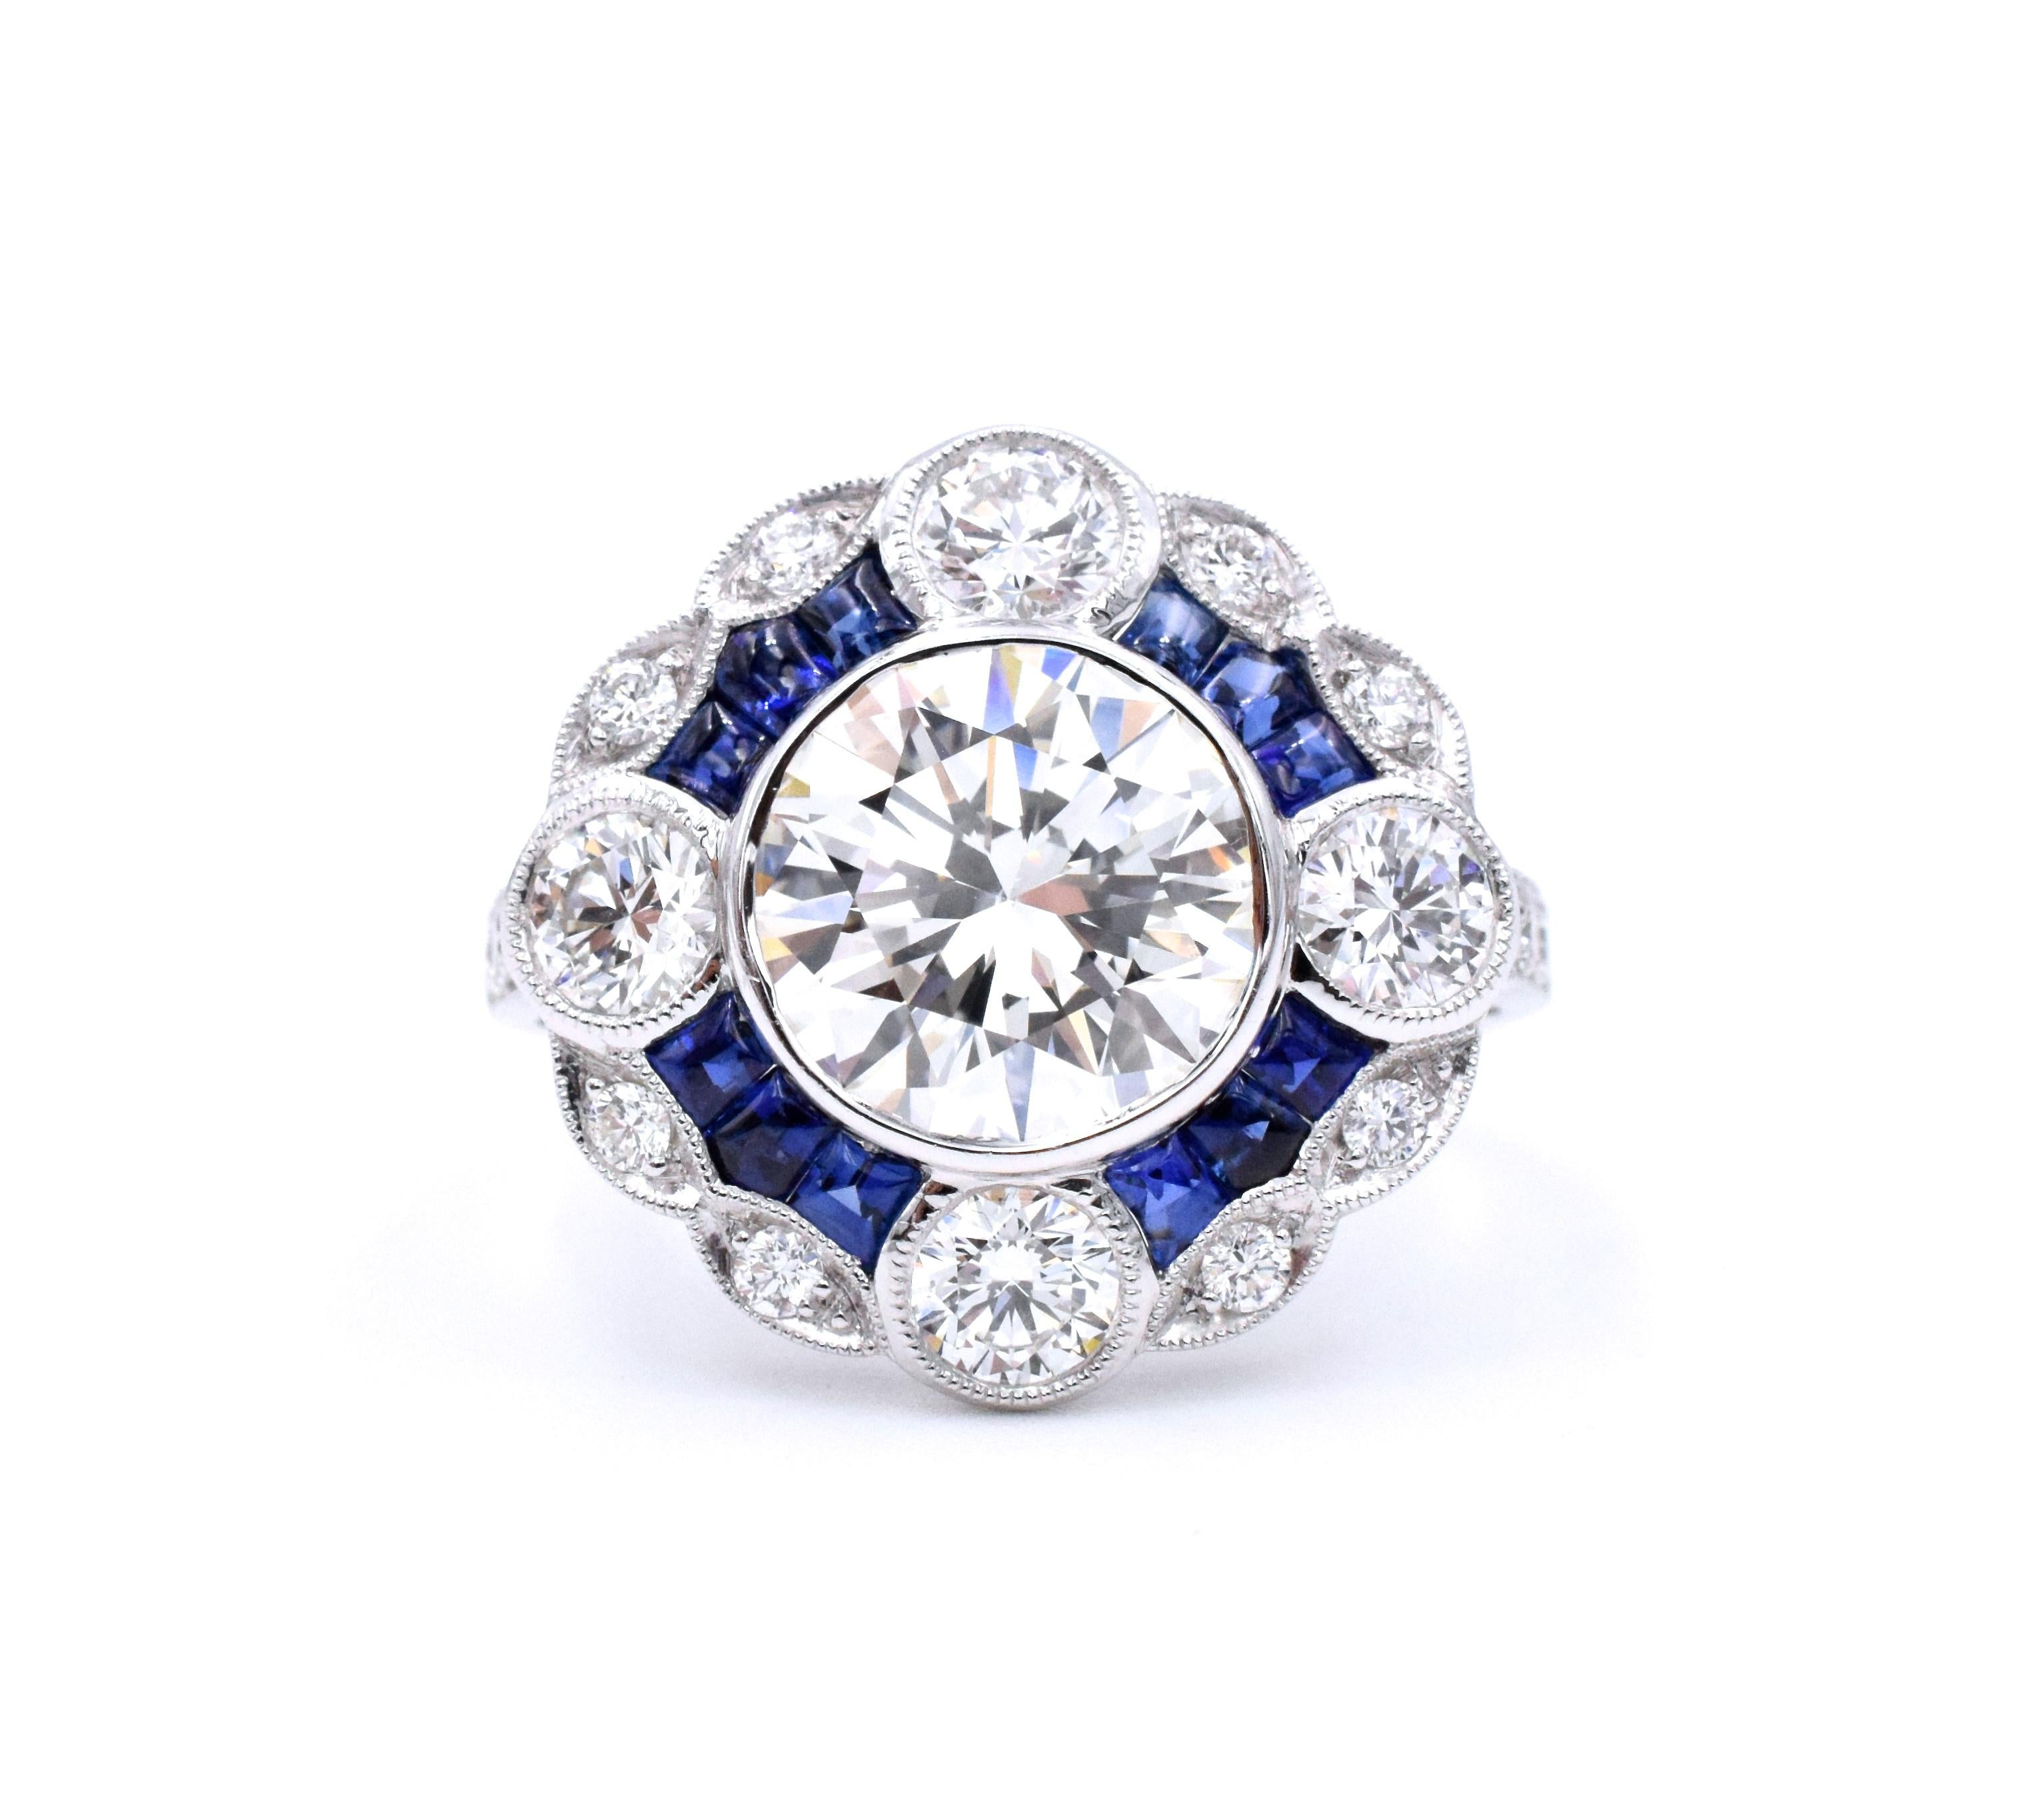 Platinum diamonds and sapphire ring , set with 18 round brilliant cut diamonds. Total
weight: approx. 1.26 carat and 12 cabochon sapphires total weight approx. 1.80ct. In the center: 3.03 carat round brilliant cut diamond, color: K, clarity: VS1,